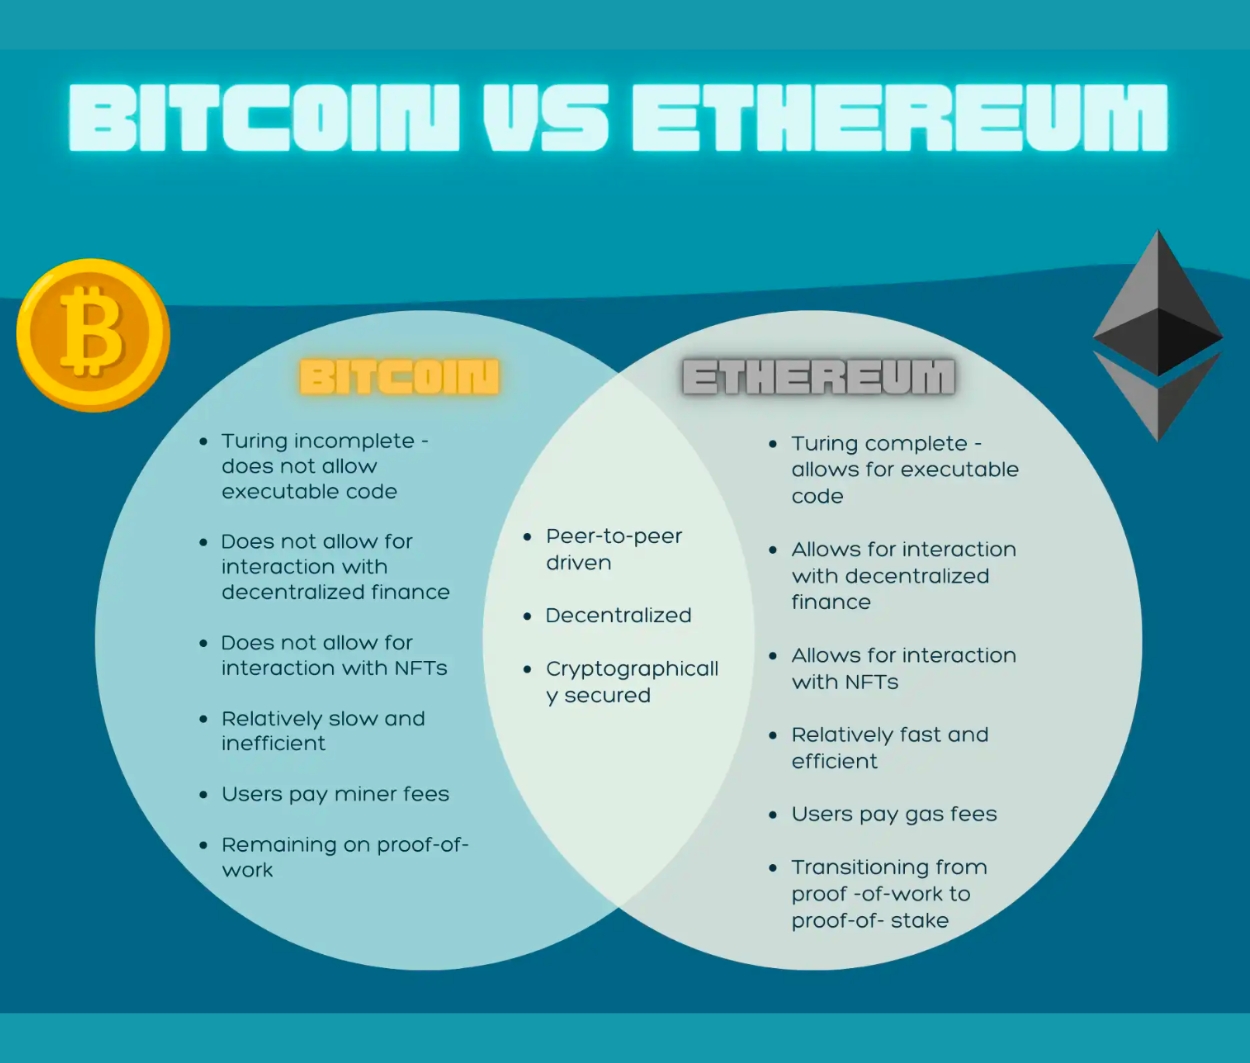 Bitcoin vs Ethereum: What’s the difference? - NerdWallet